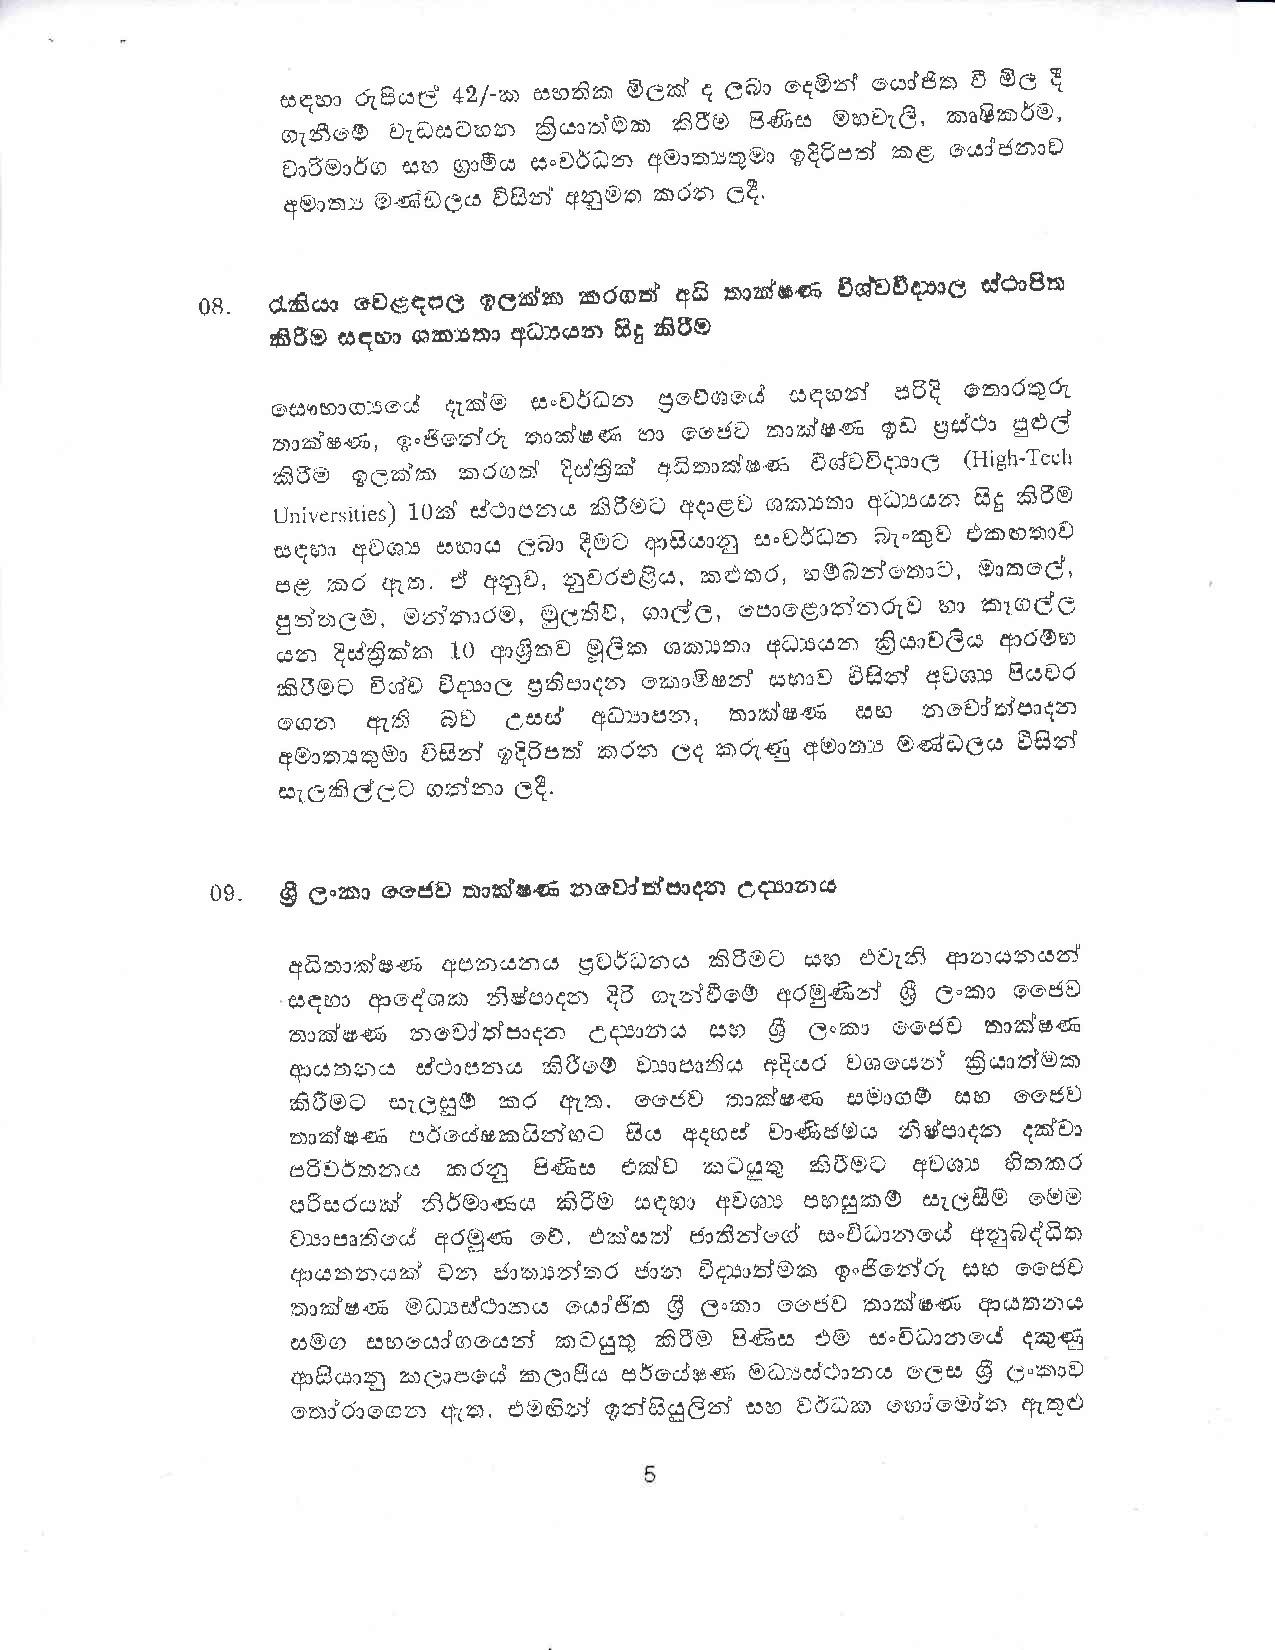 Cabinet Decision on 15.07.2020 page 005